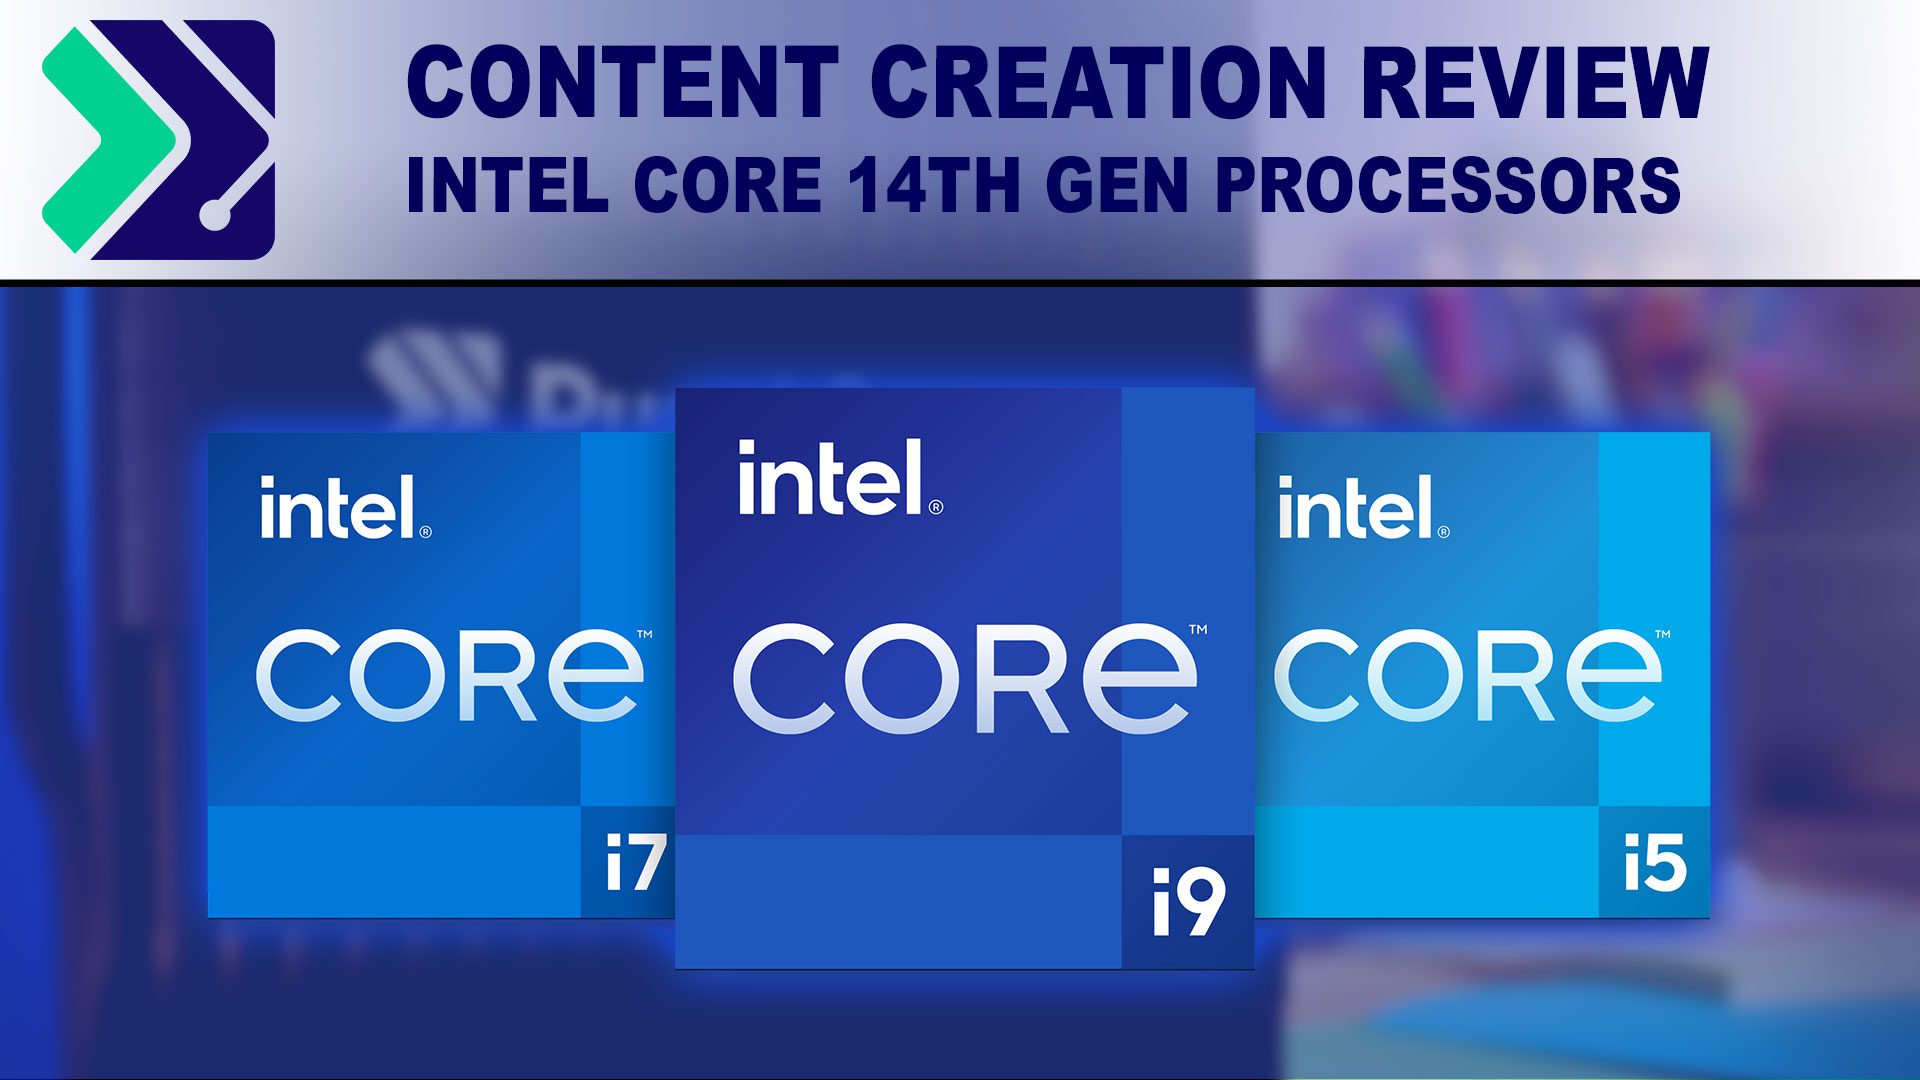 Intel Core i5, i7, and i9 boxes on a blue background with the title above them "Content Creation Review".